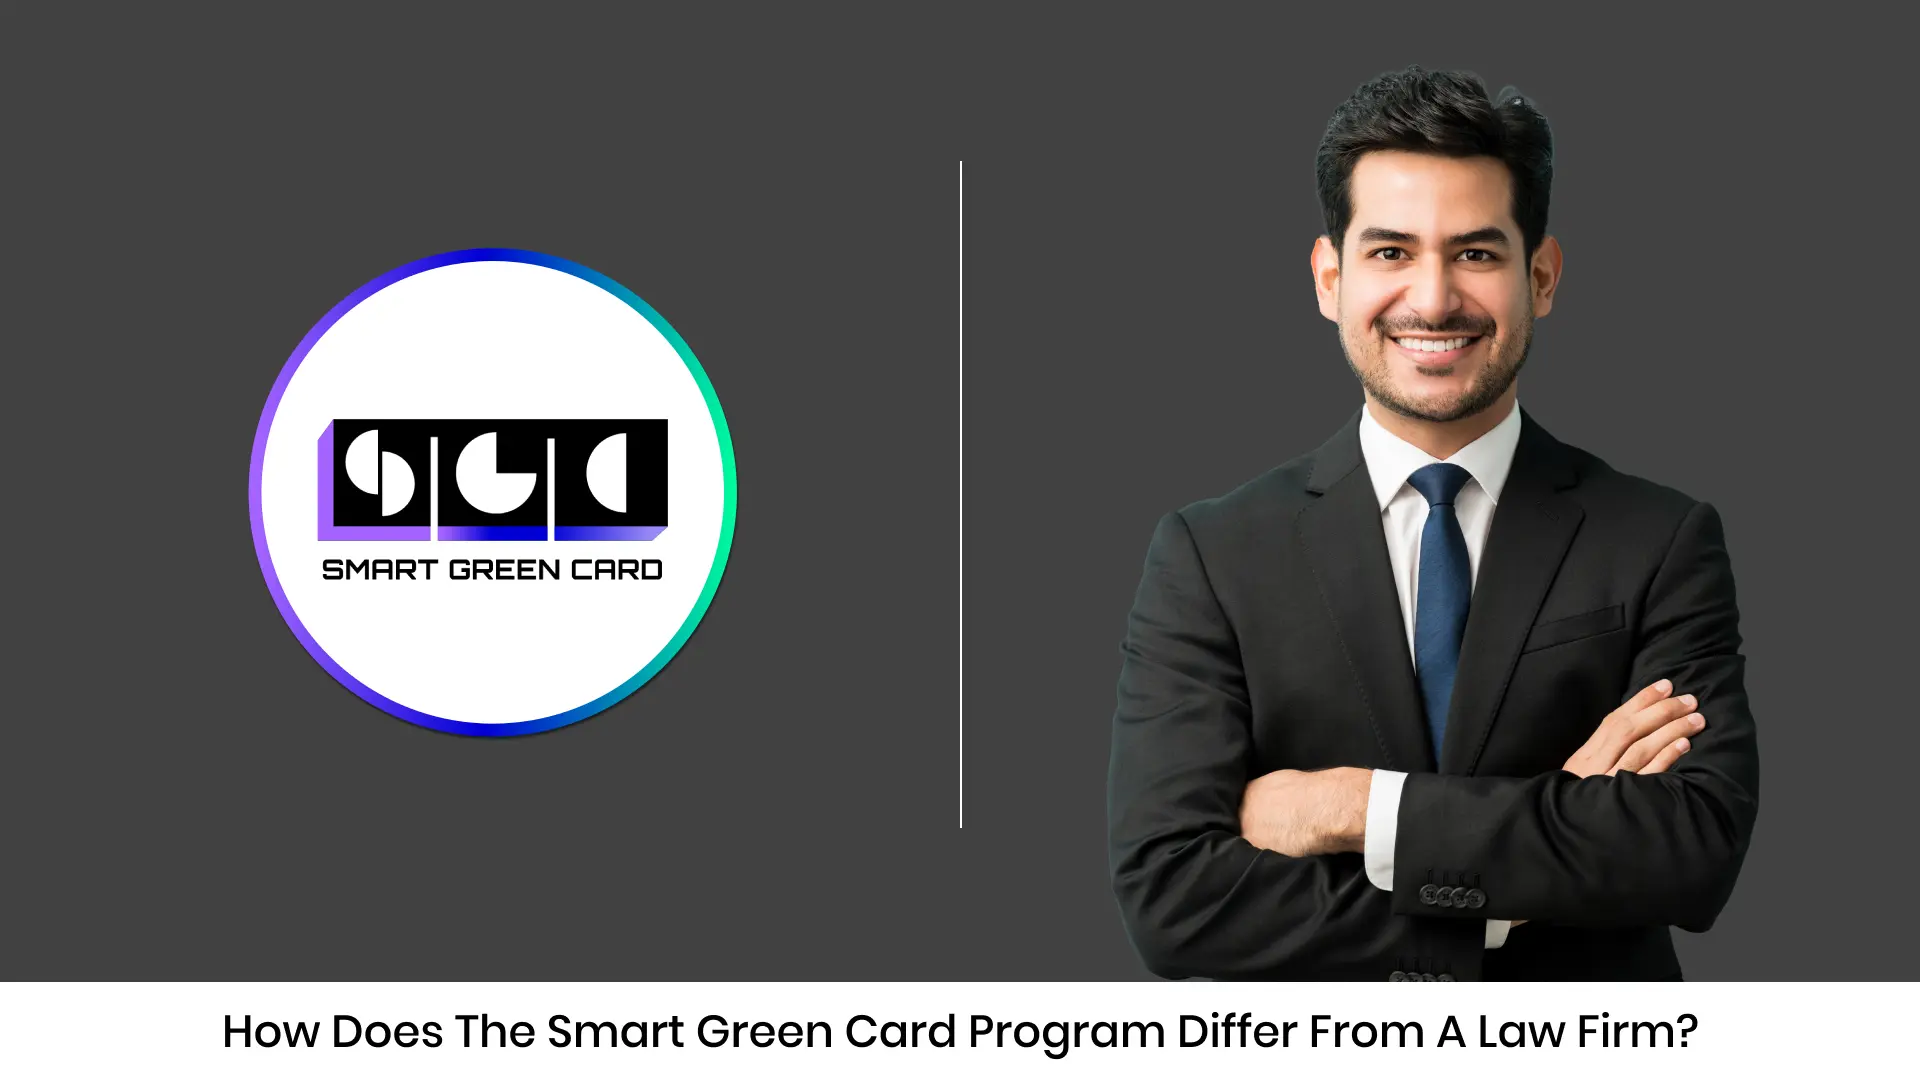 How Does the Smart Green Card Program Differ from a Law Firm?